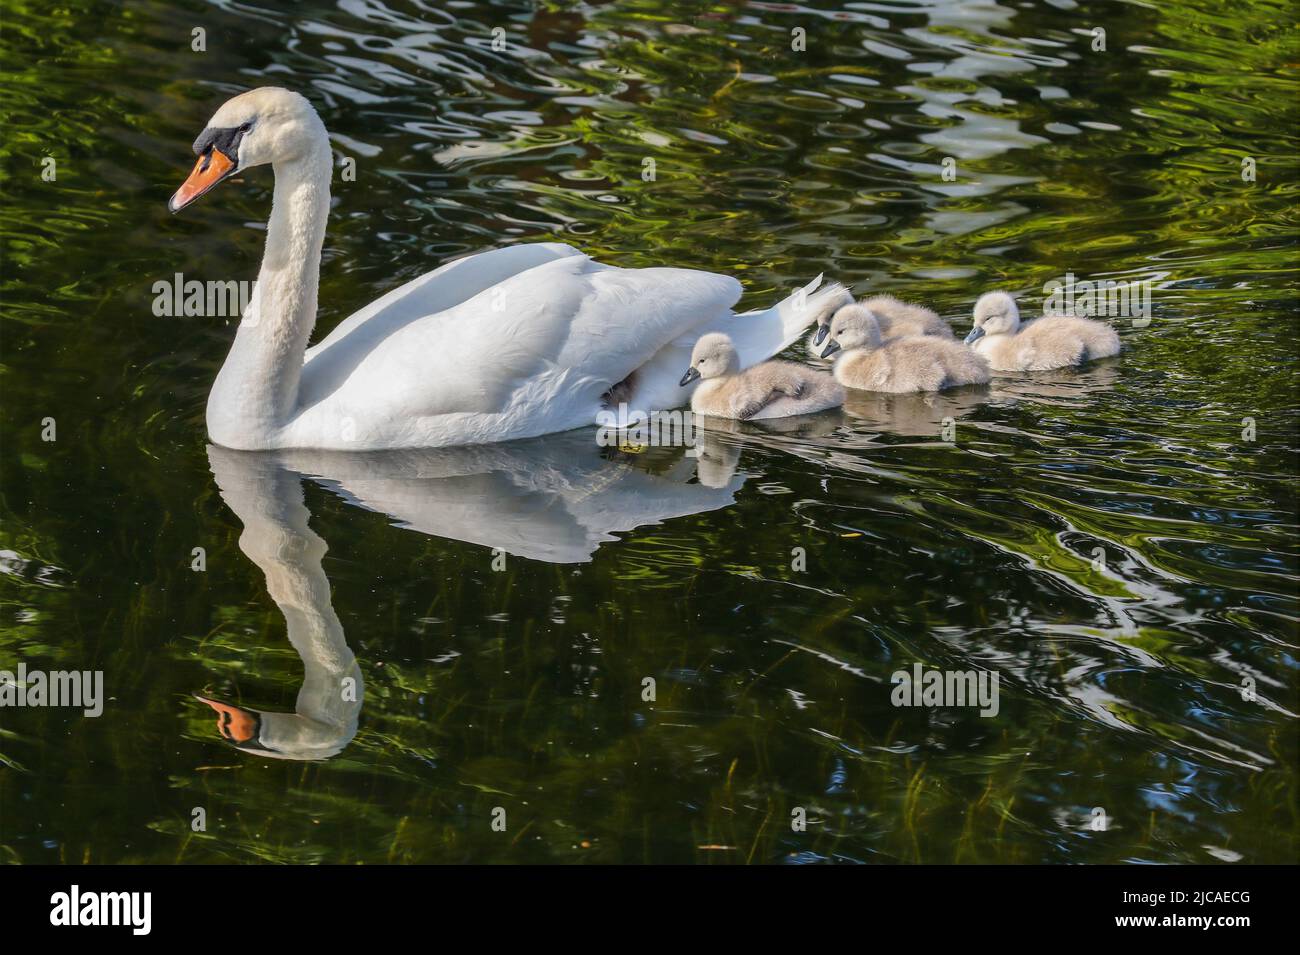 Mute swan 'Cygnus olor' glides on water with her five cygnets. Water reflection. Cute fluffy baby swans with soft down. Grand Canal, Dublin, Ireland Stock Photo